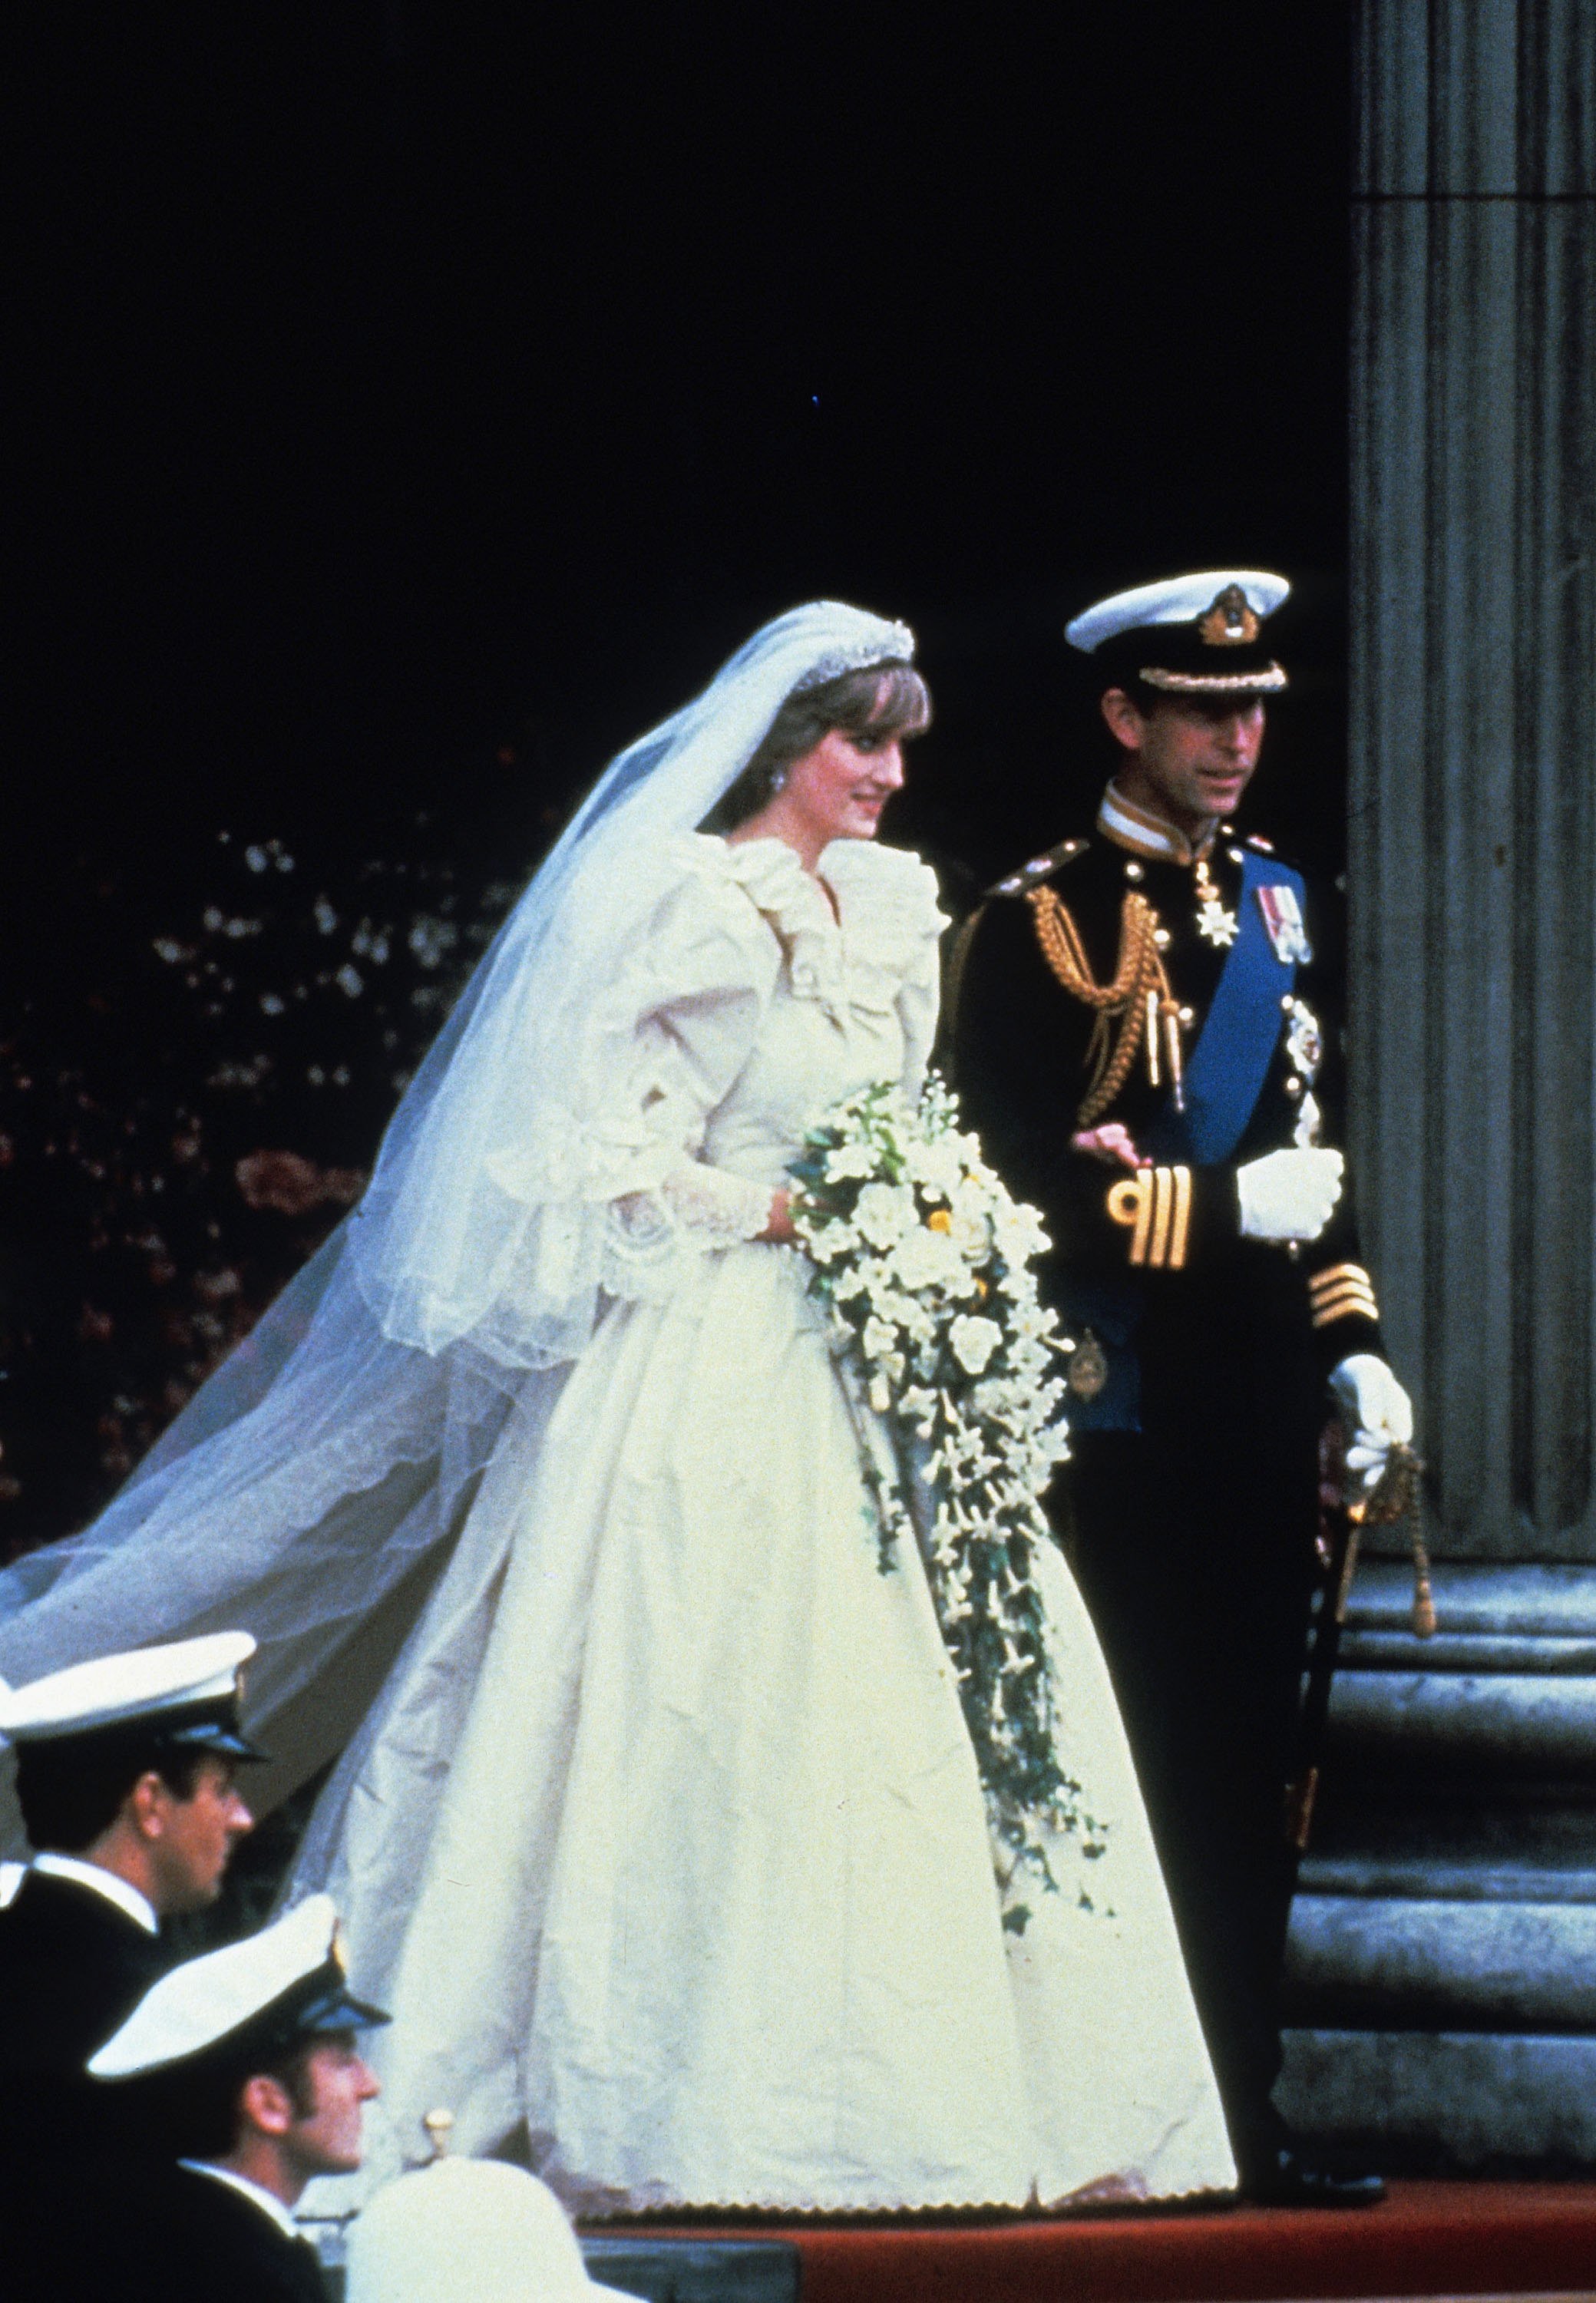 Prince Charles, Prince of Wales and Diana, Princess of Wales, wearing a wedding dress designed by David and Elizabeth Emanuel and the Spencer family Tiara, leave St. Paul's Cathedral following their wedding on July 29, 1981 in London, England. | Source: Getty Images